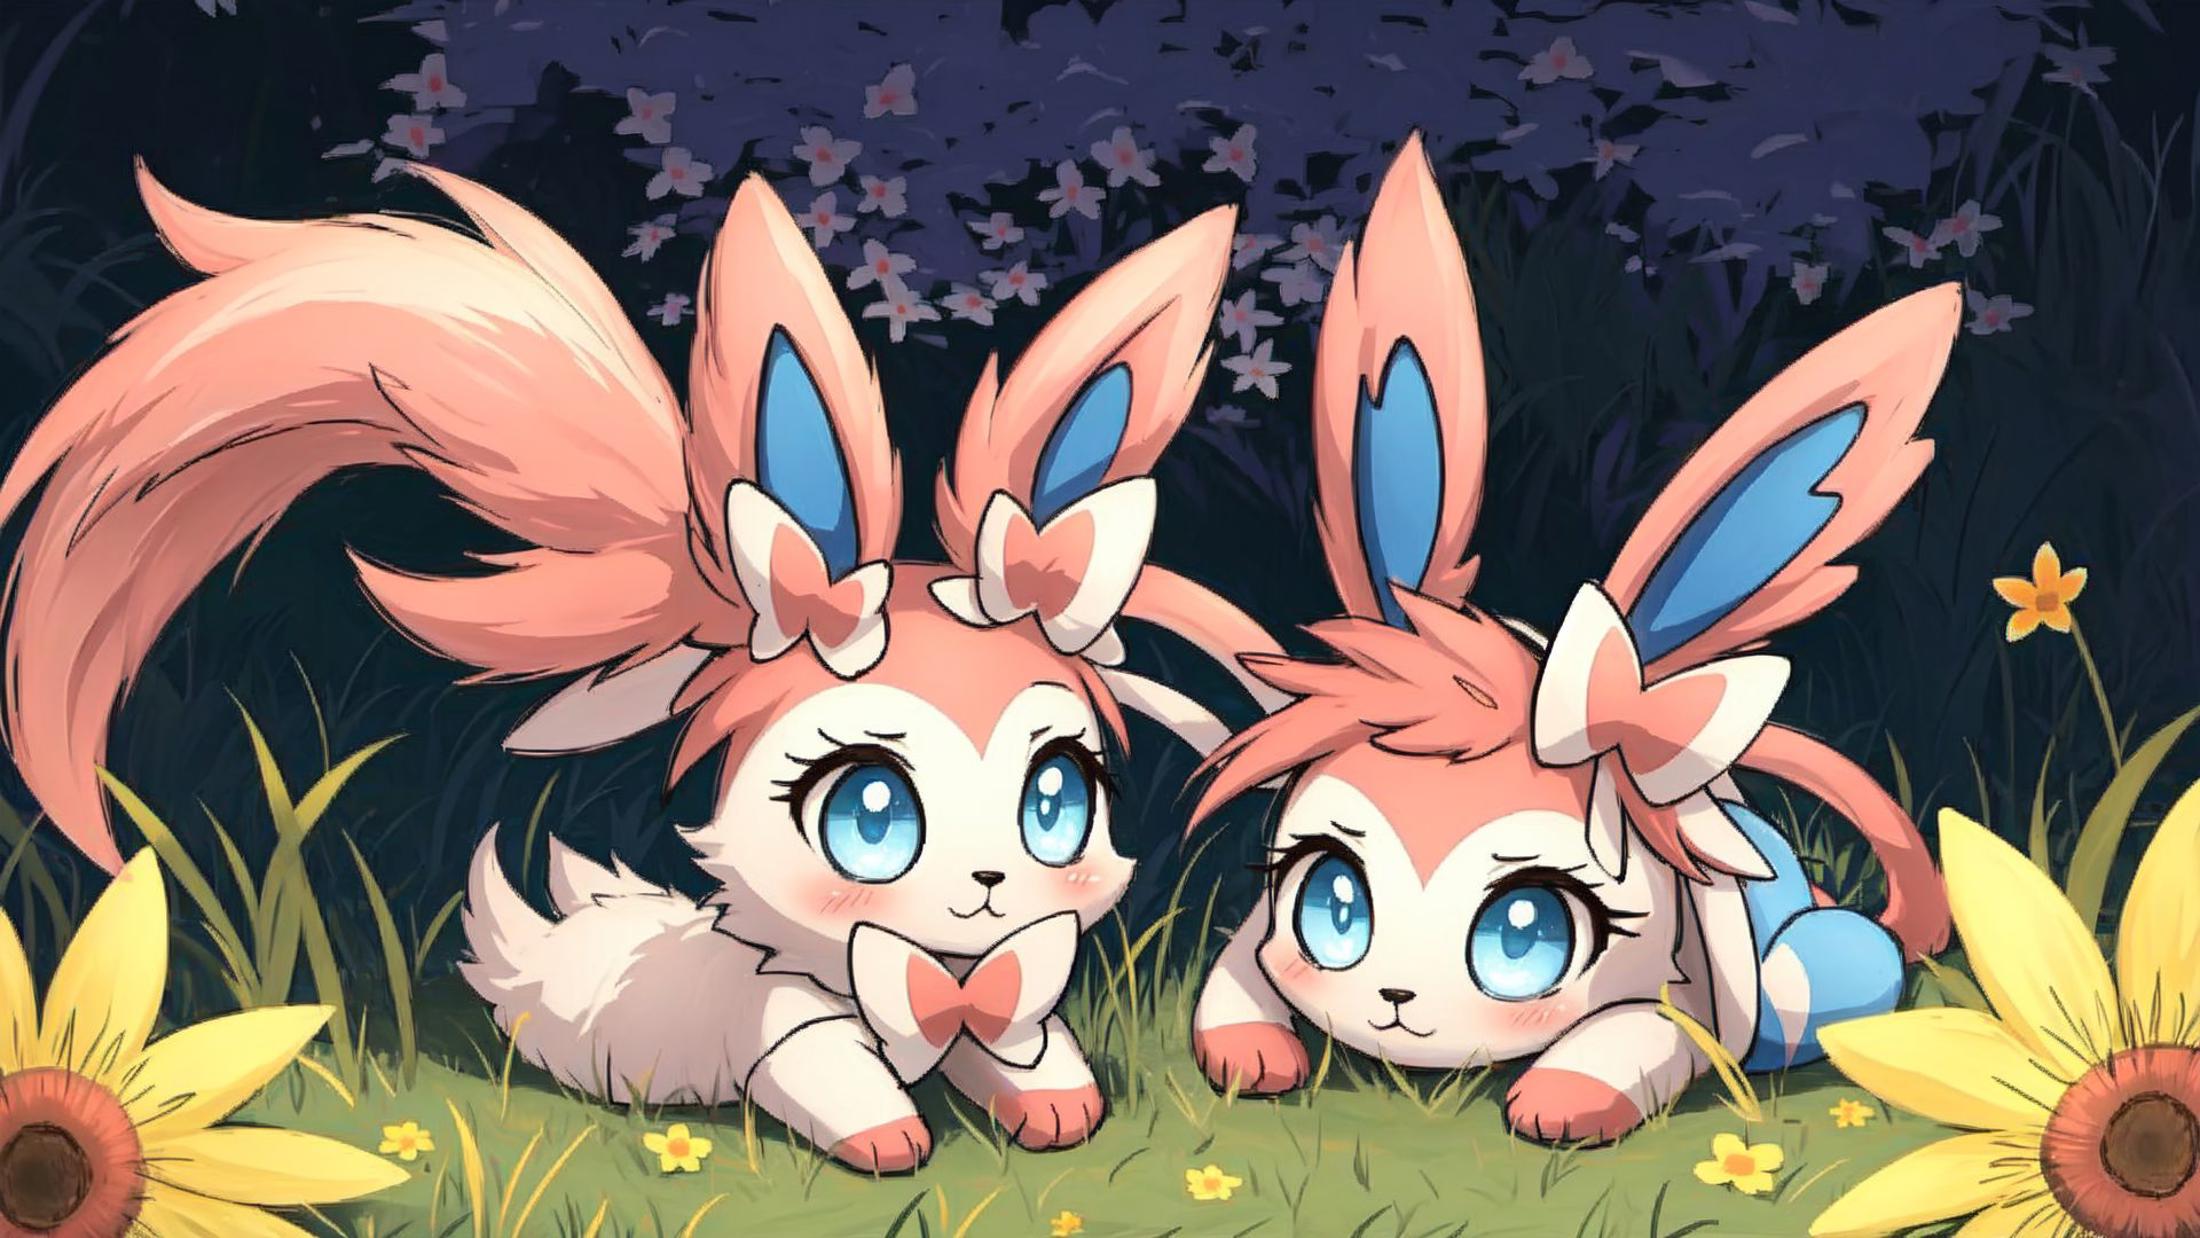 Sylveon - Pokemon | Pocket monsters image by marusame